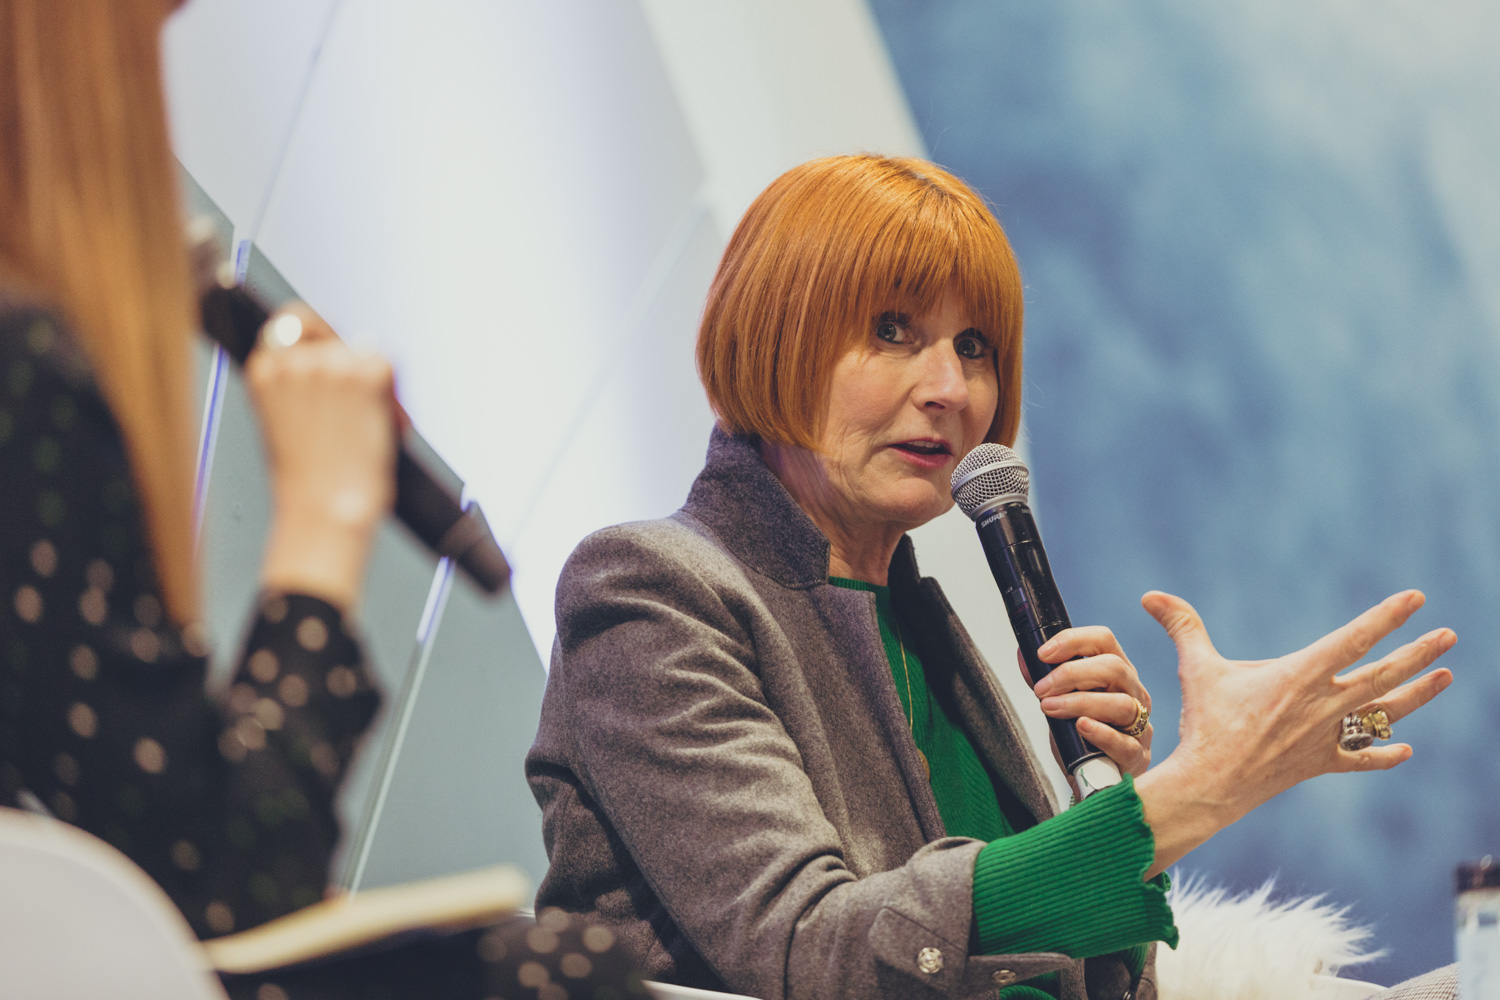 Above: Mary Portas urged retailers to think ‘people, planet, profit’ during her engaging talk at Spring Fair. 